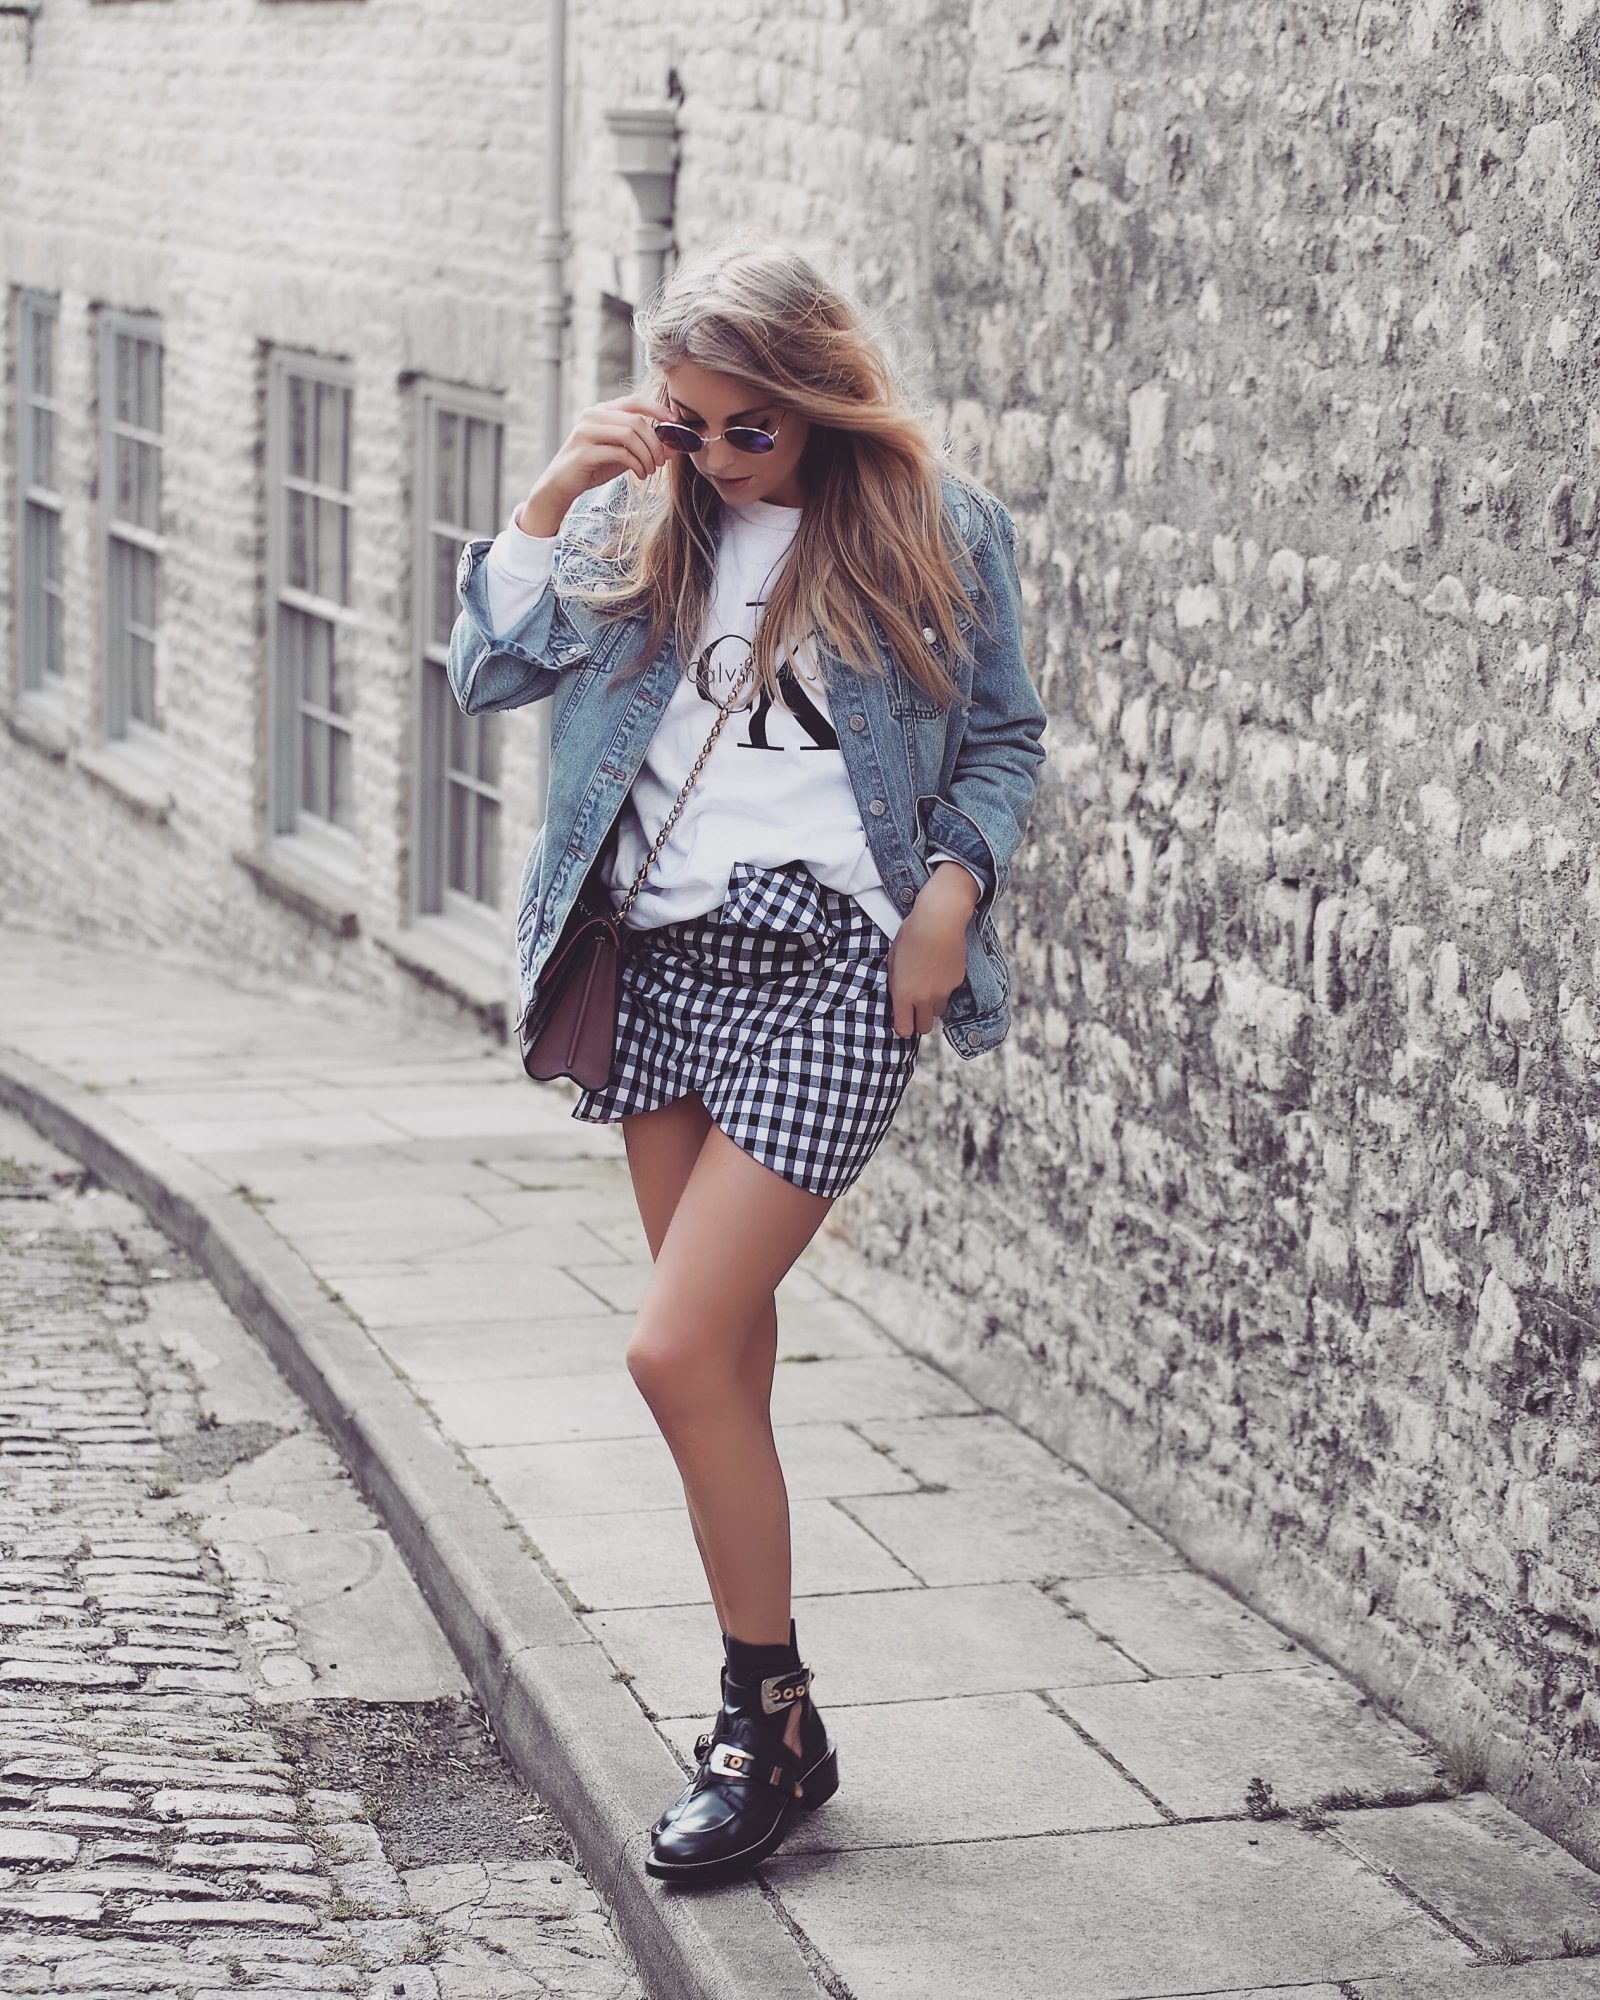 Gingham Skirt Outfit Inspiration